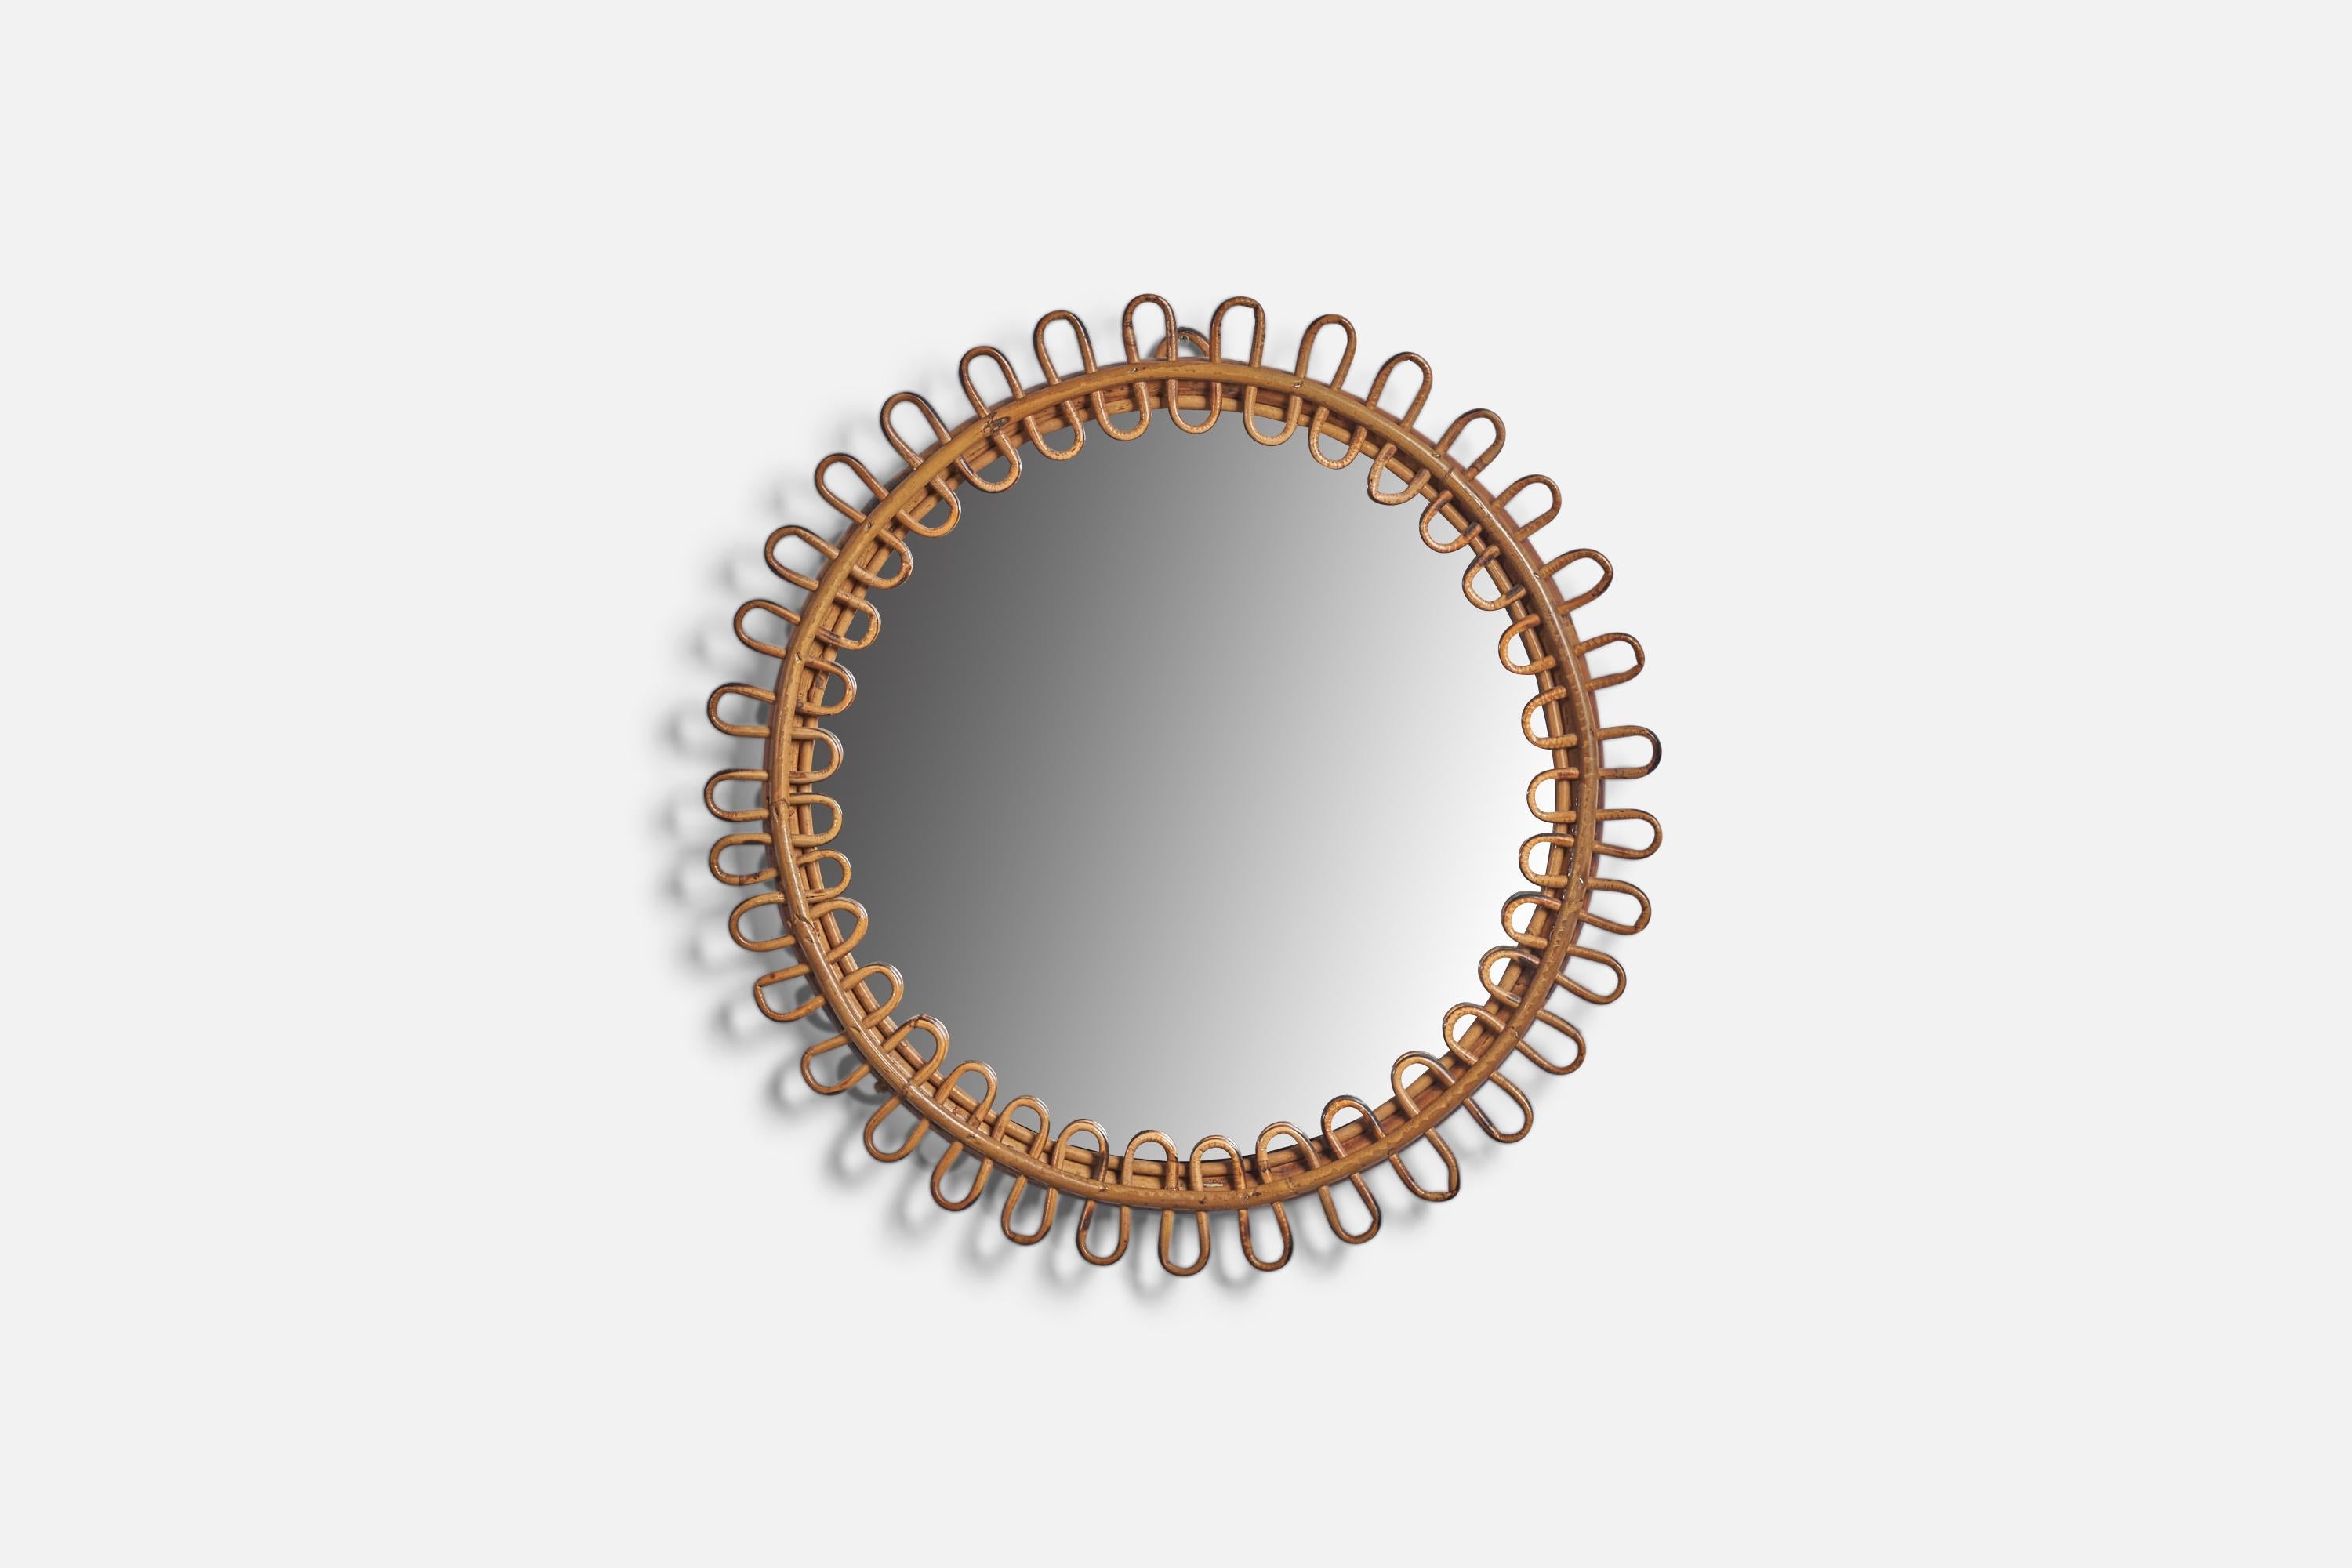 A round rattan wall mirror designed and produced in Italy, 1950s.